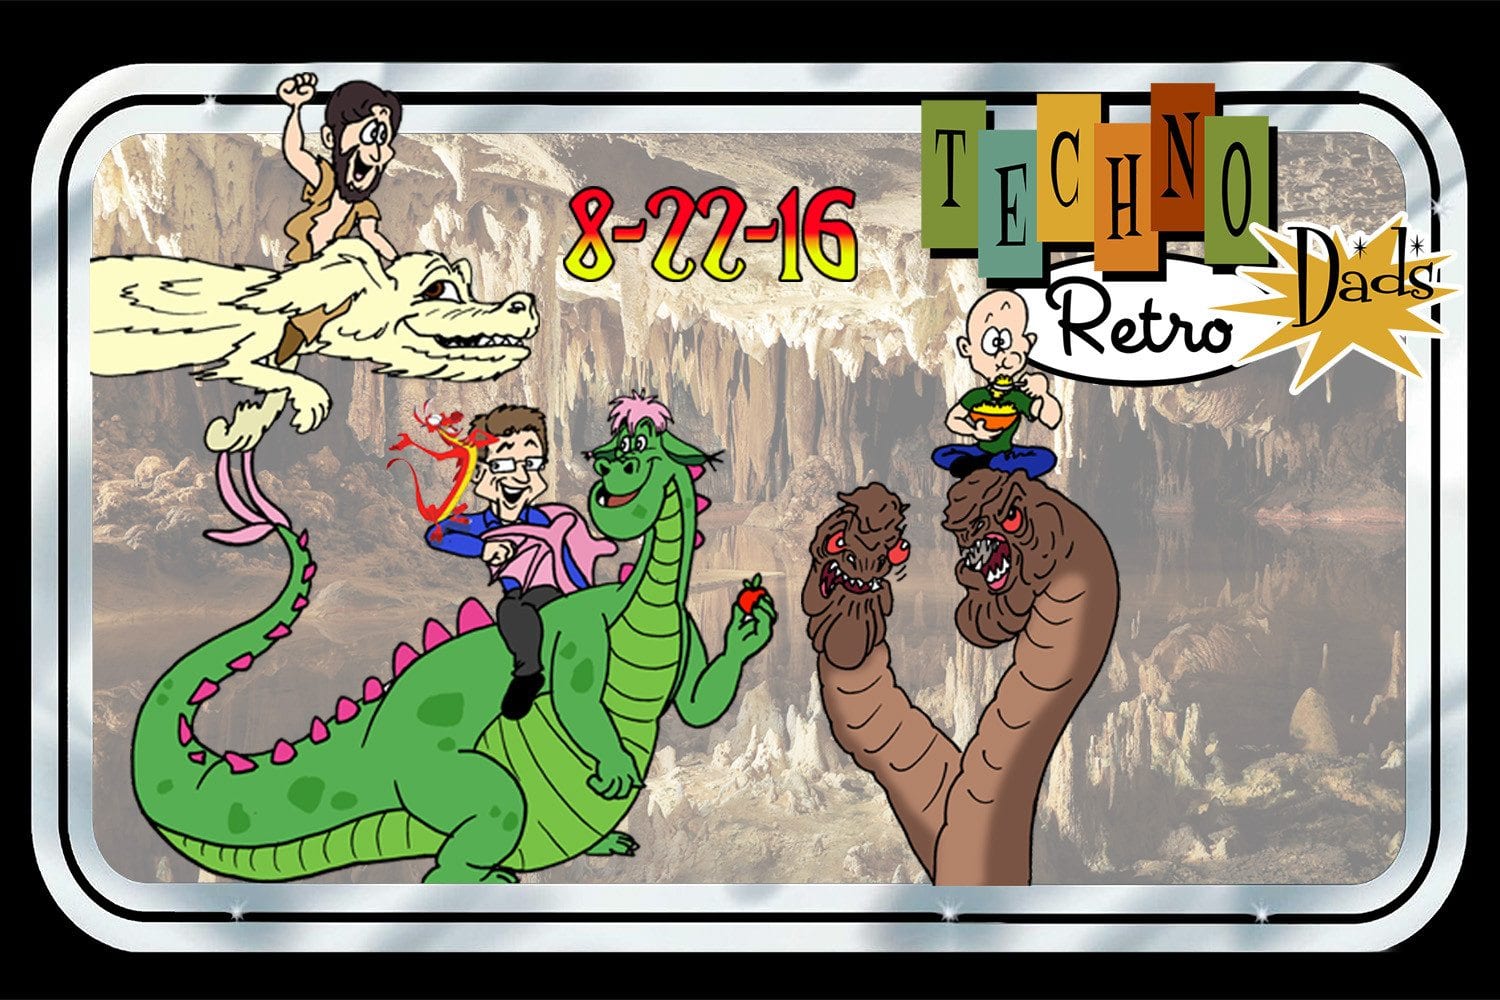 TechnoRetro Dads: There Be Dragons Here with Pete's Dragon